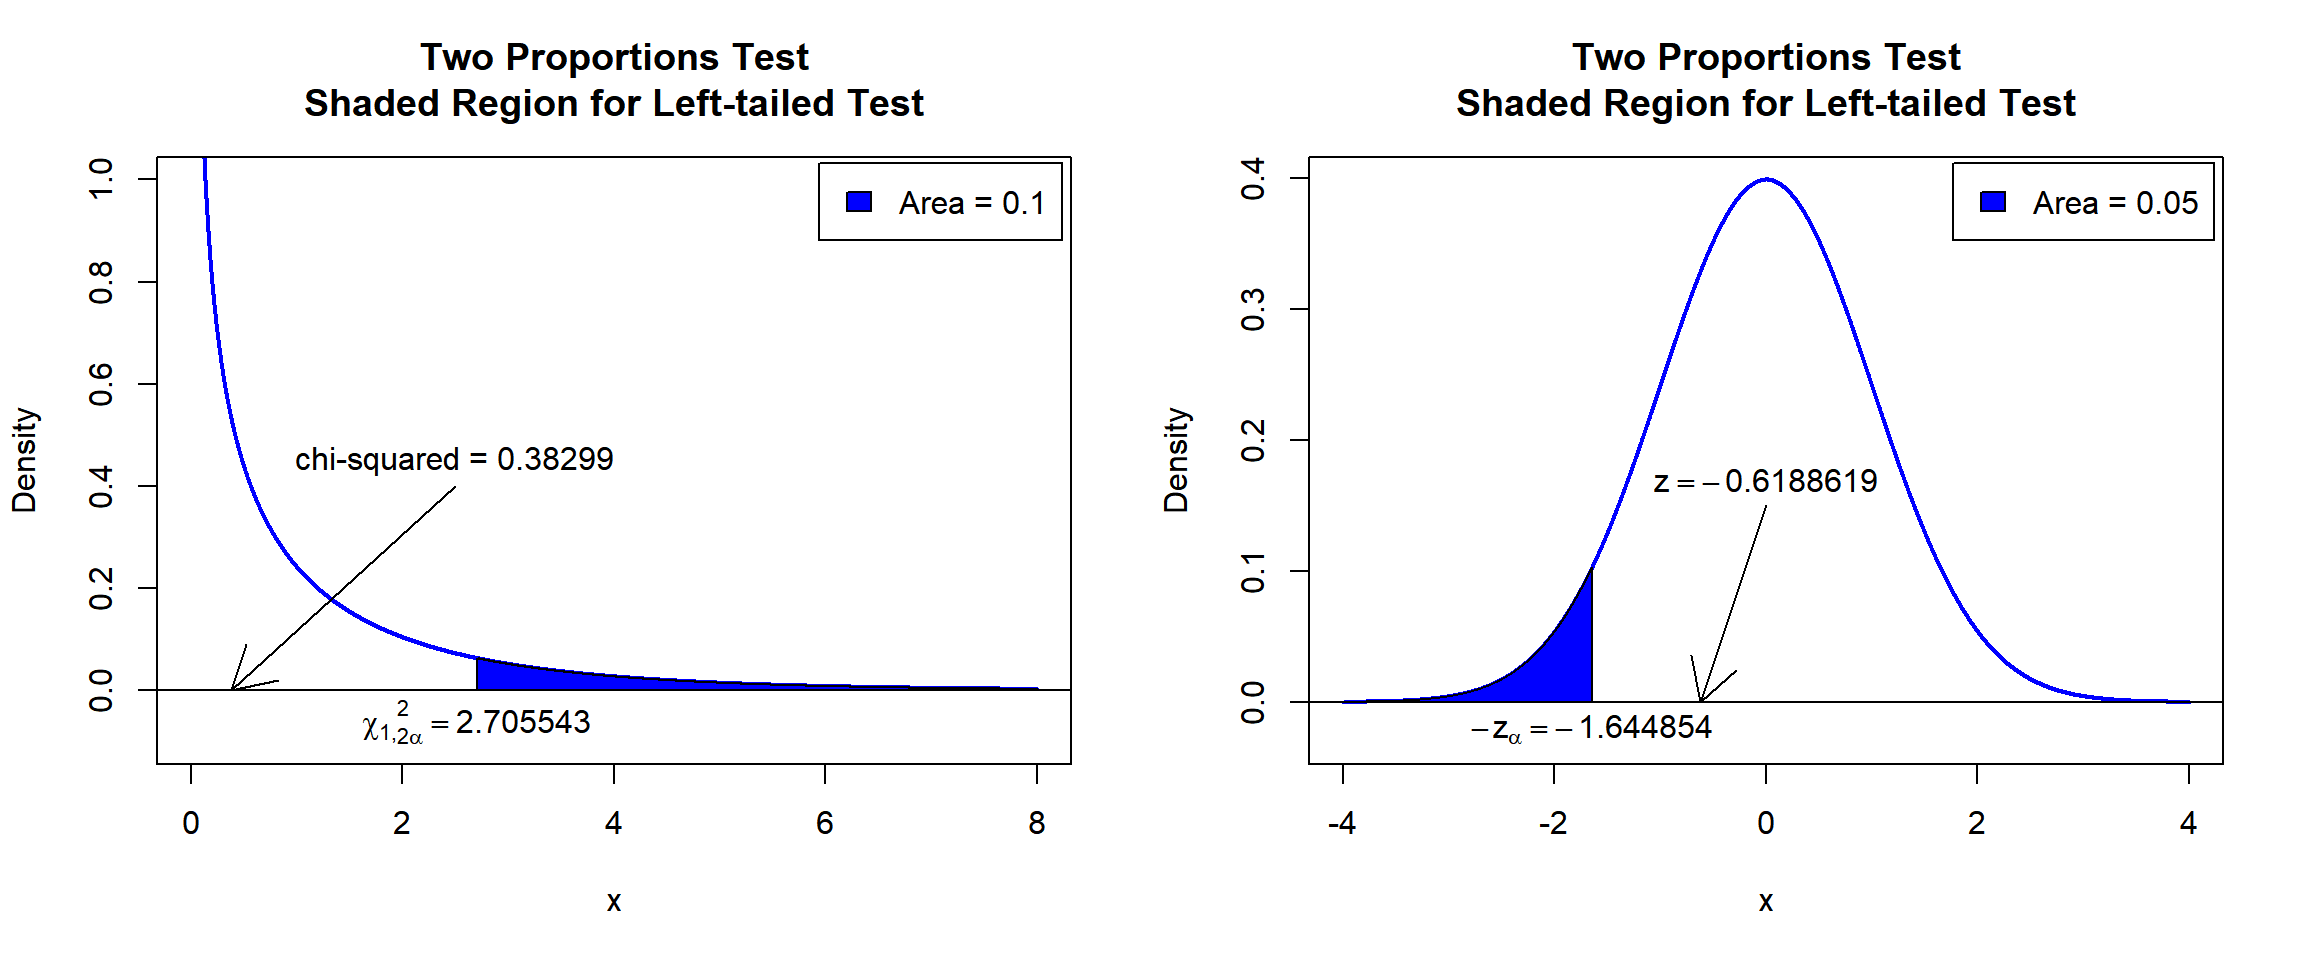 Two Proportions Test Shaded Region for Left-tailed Test in R